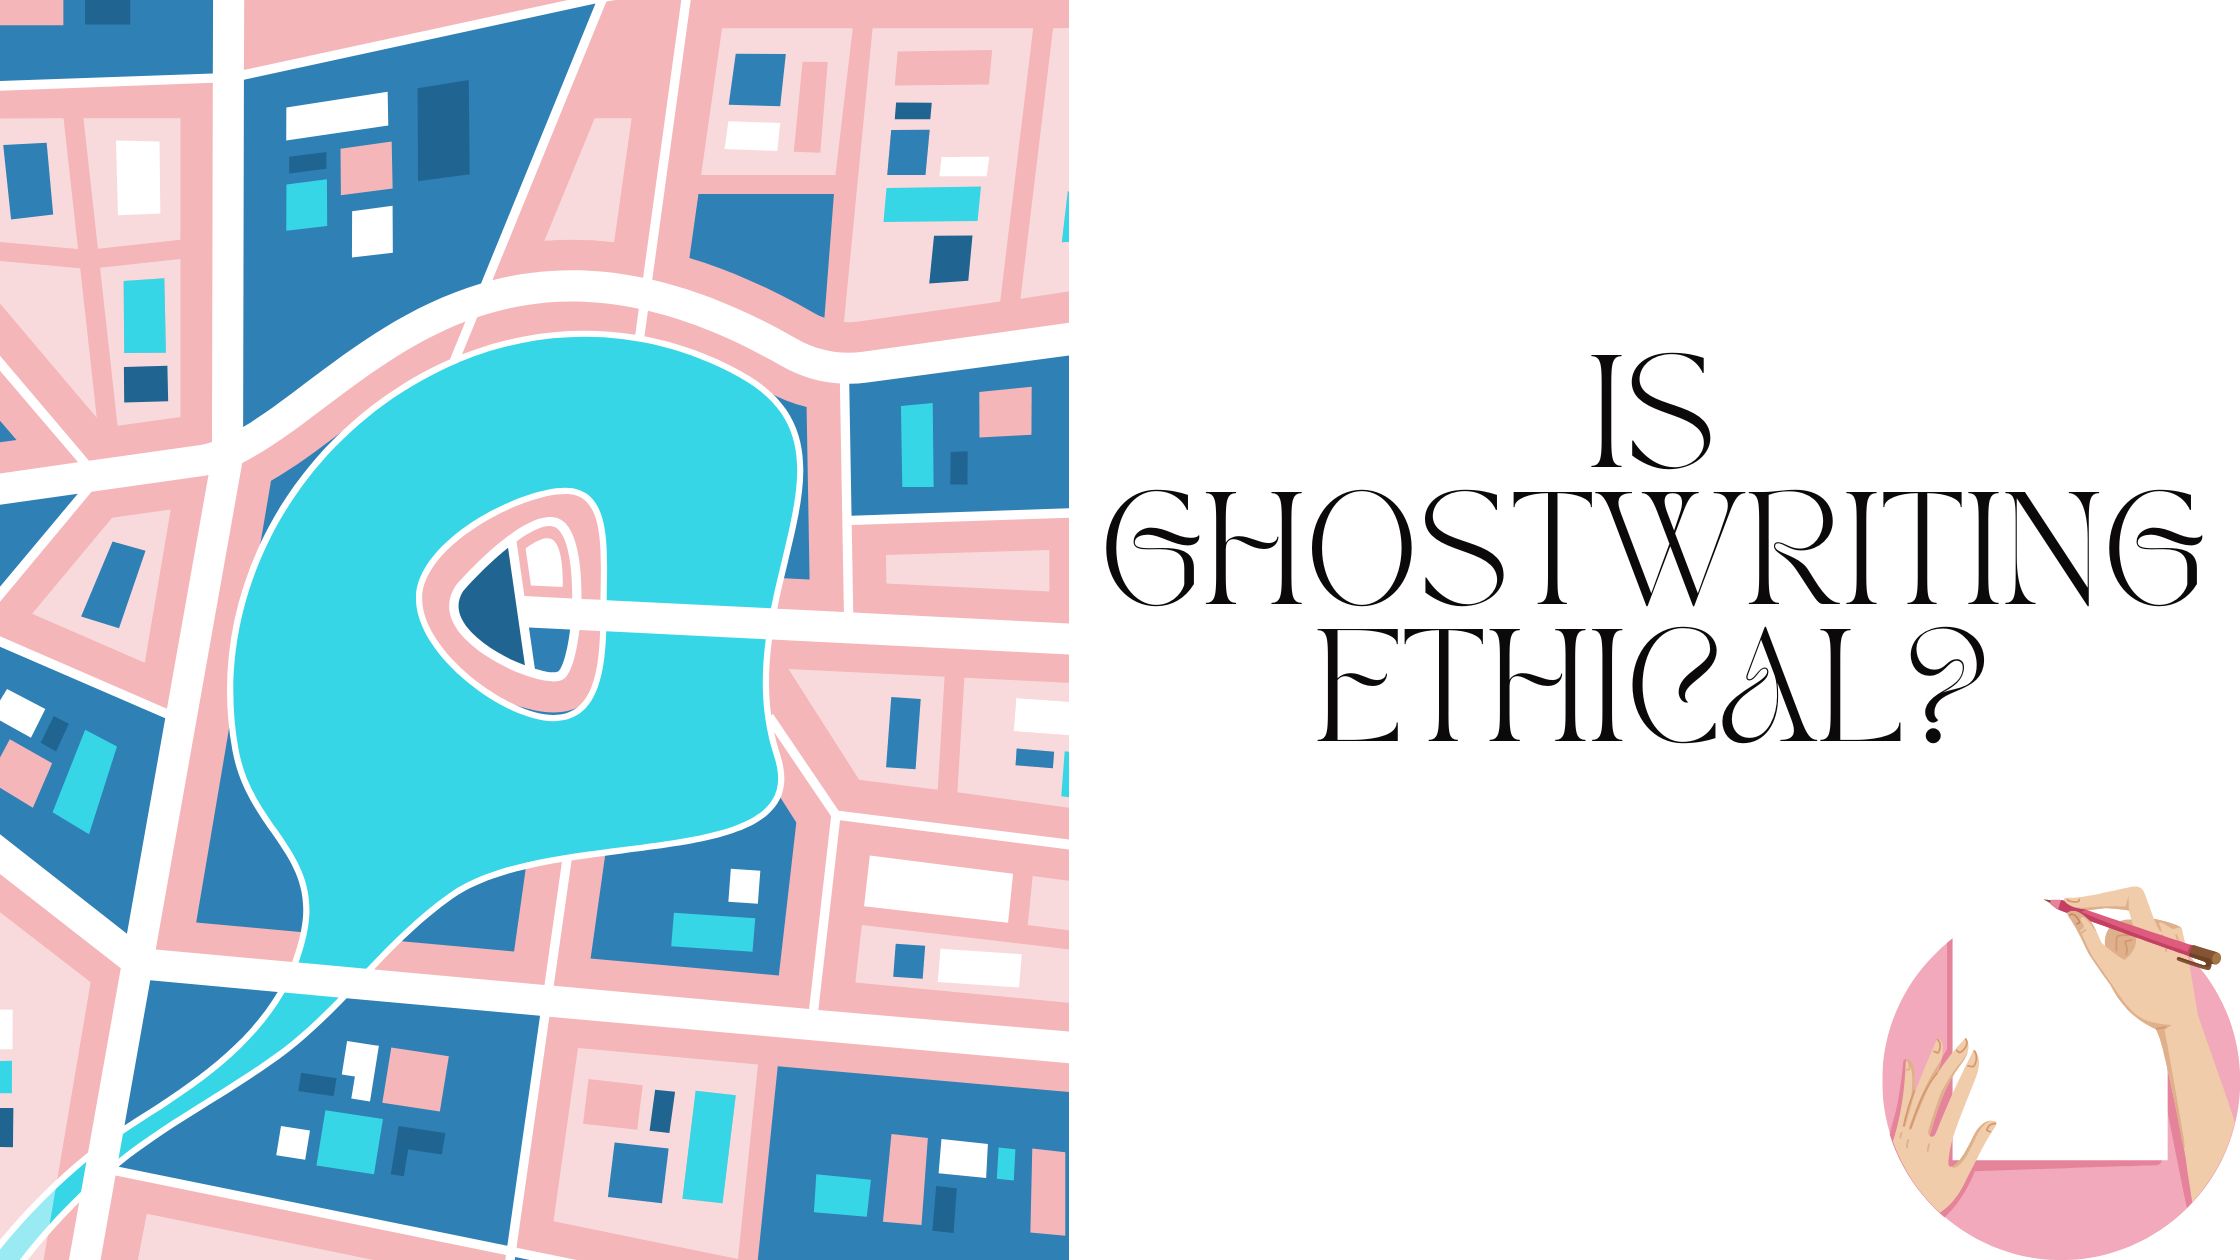 Is ghostwriting ethical?